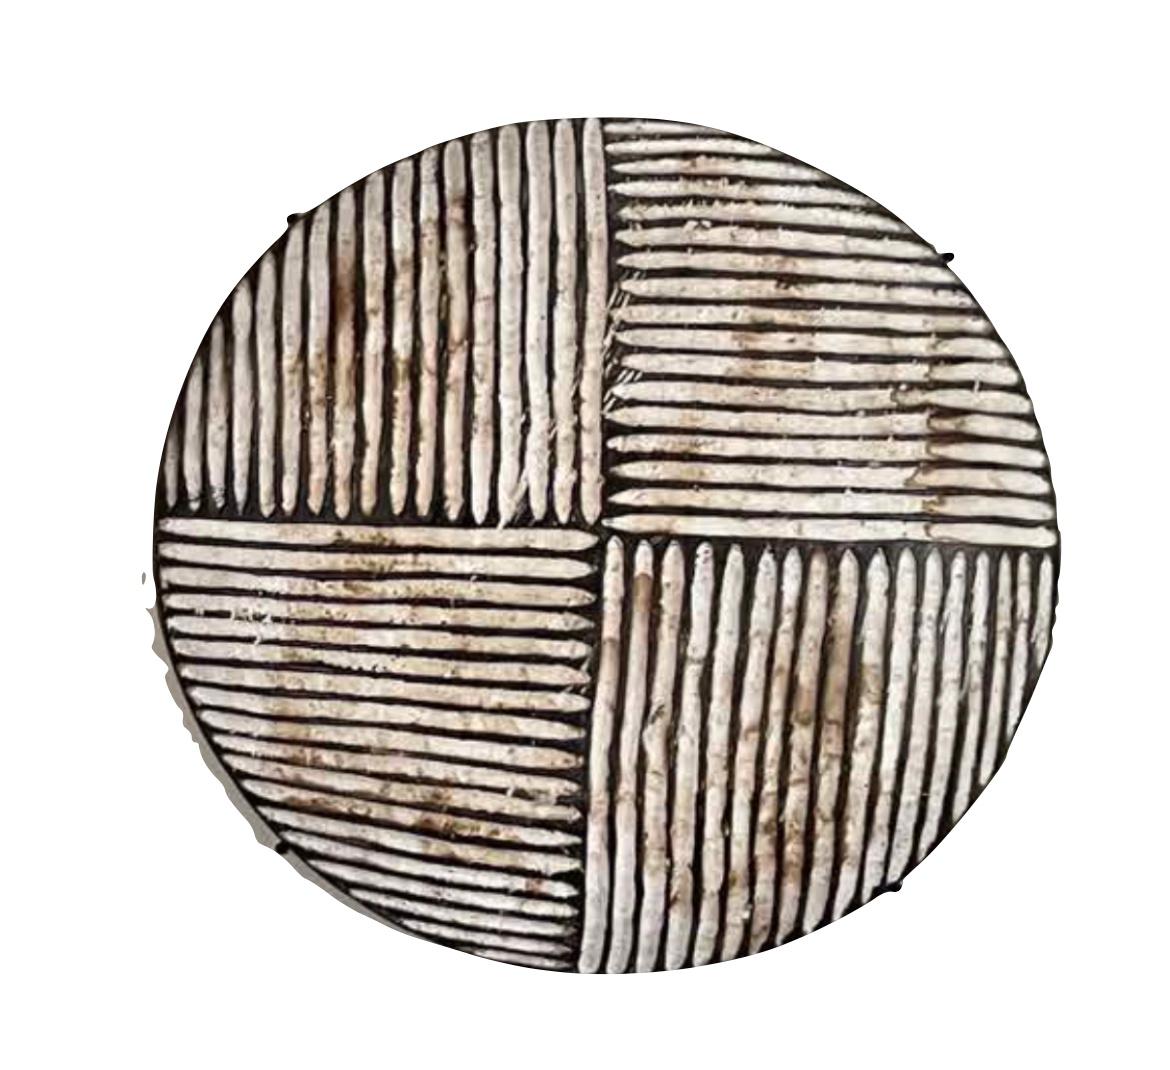 Traditional South African Zulu shields date back to King Shaka Zulu and have been used by tribesman in battle for hundred of years.
These shields are no longer used in battle but instead used for traditional Zulu ceremonies such as weddings in